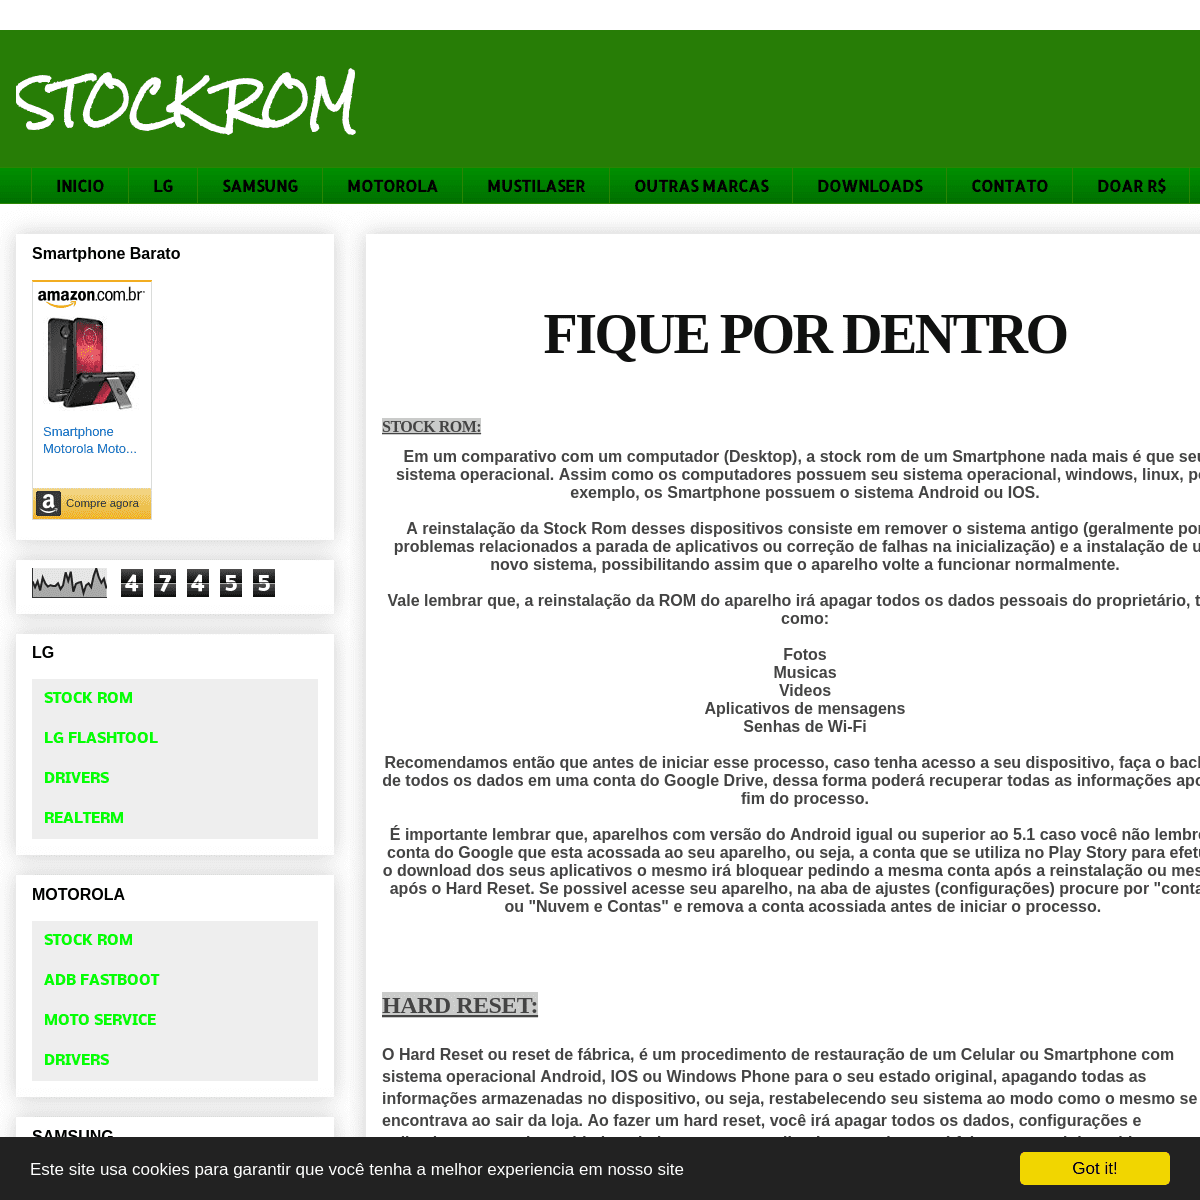 A complete backup of stockrom-freirecell.blogspot.com